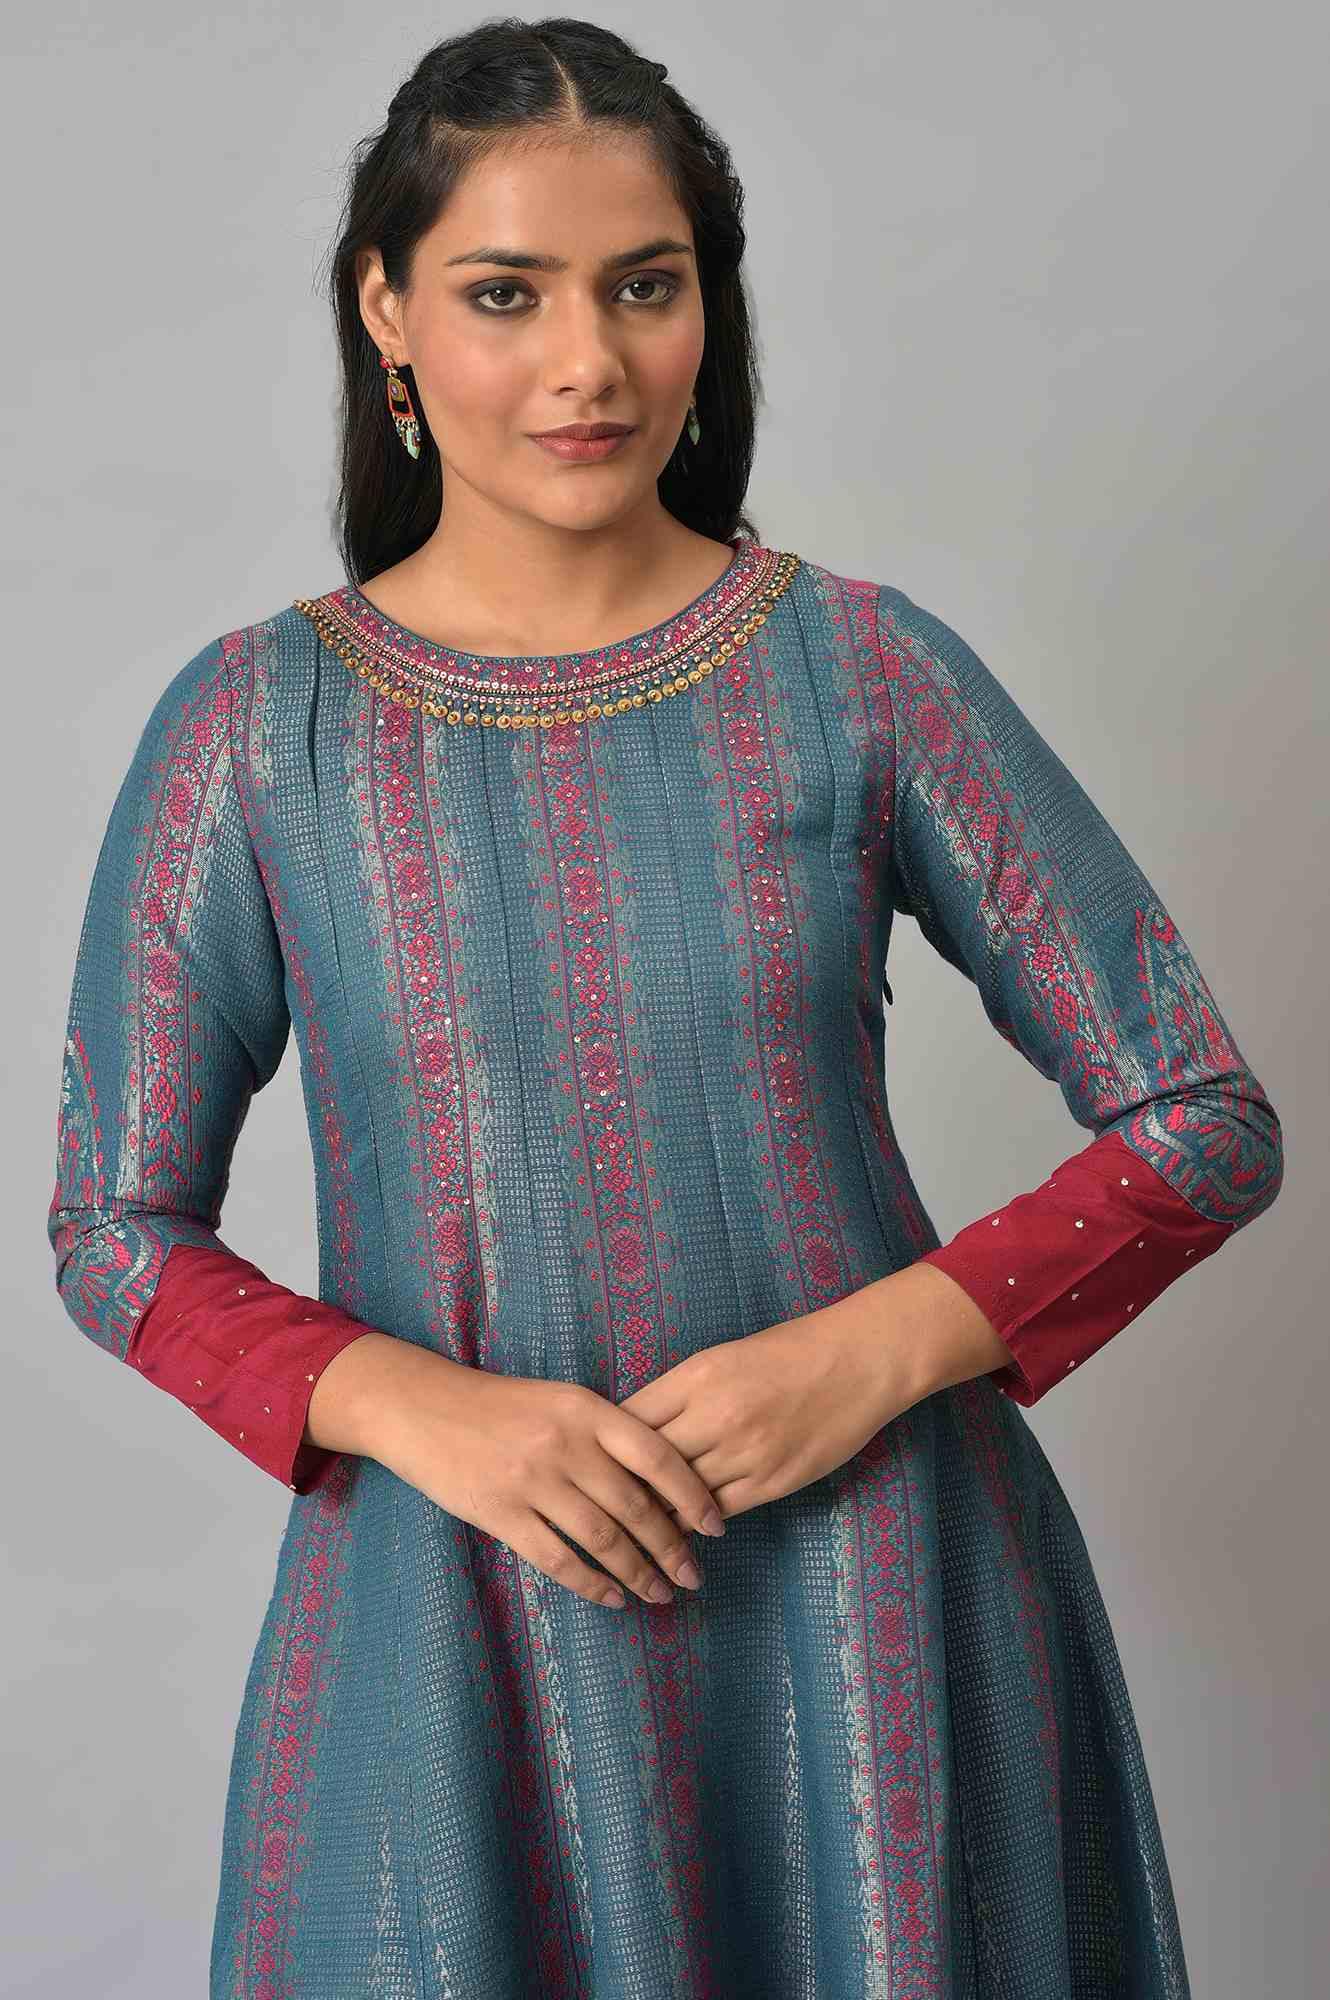 Teal And Pink Panelled Festive Winter Dress - wforwoman